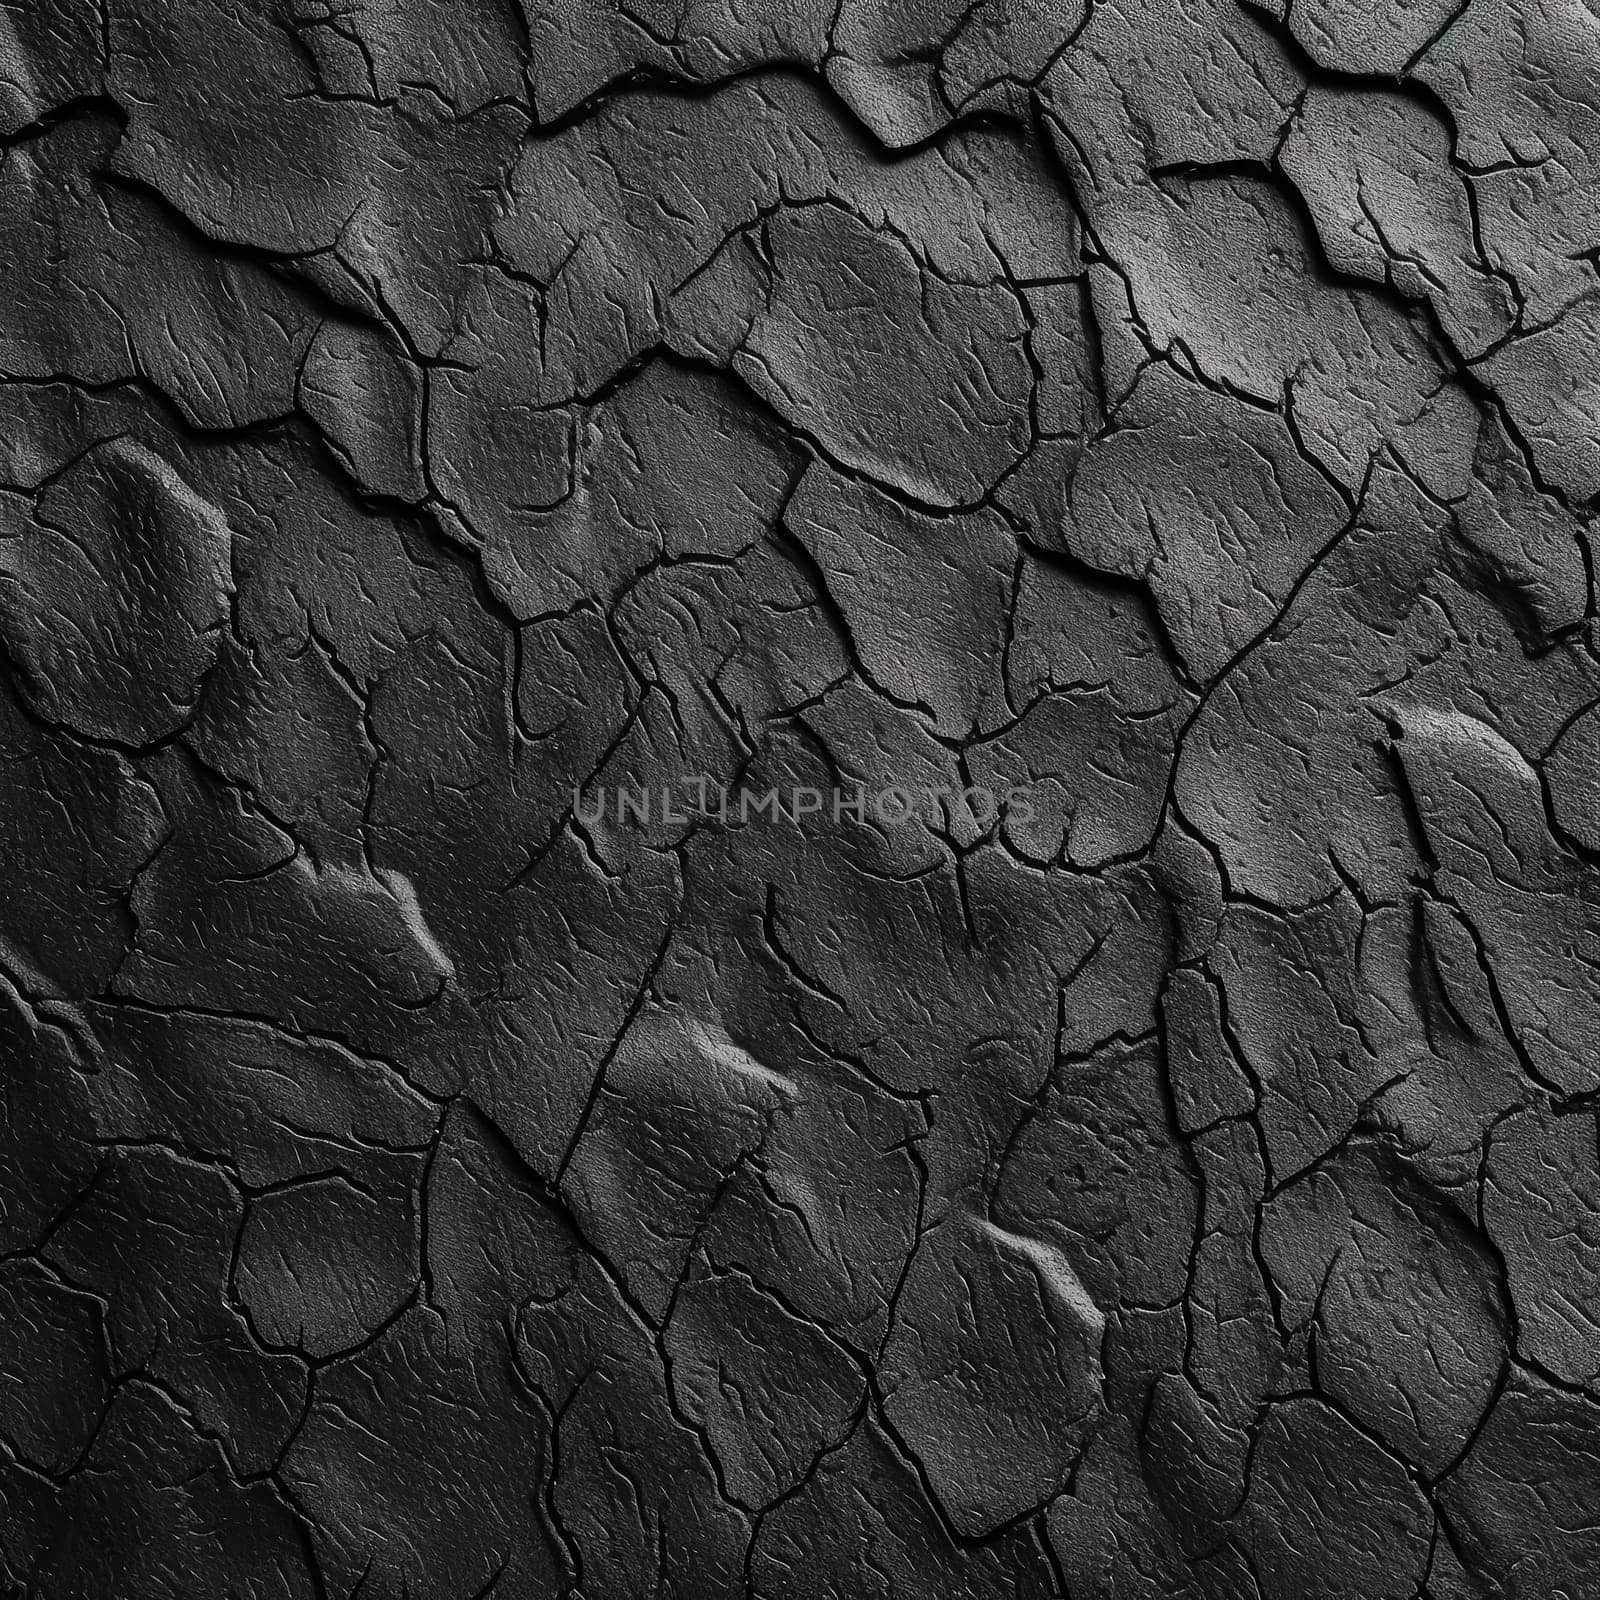 A black and white photo of a wall with a rough texture. The photo has a moody and somber feel to it